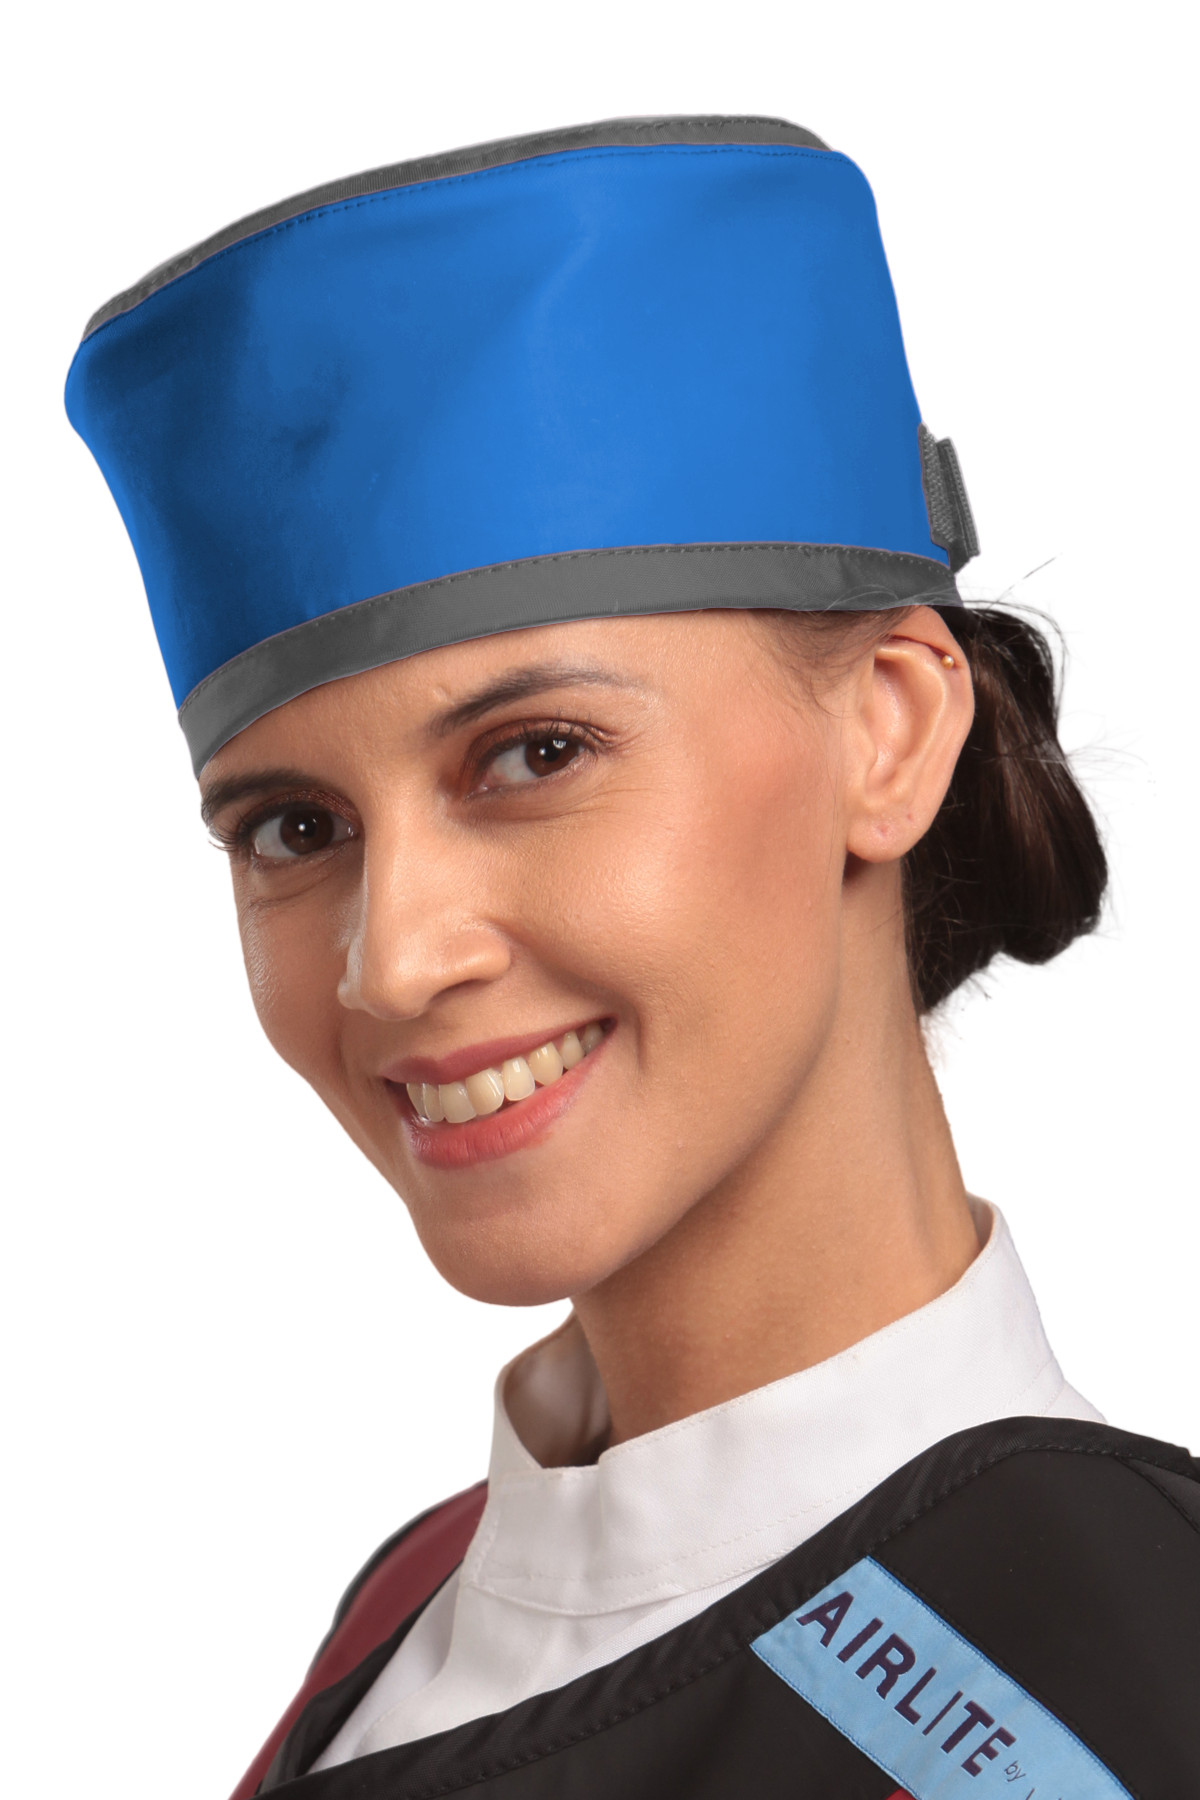 Up-close left-side frontal view of a female model wearing a radiation protection head shield. The head shield is Electric blue with grey-colored lines around the lower and upper edges.